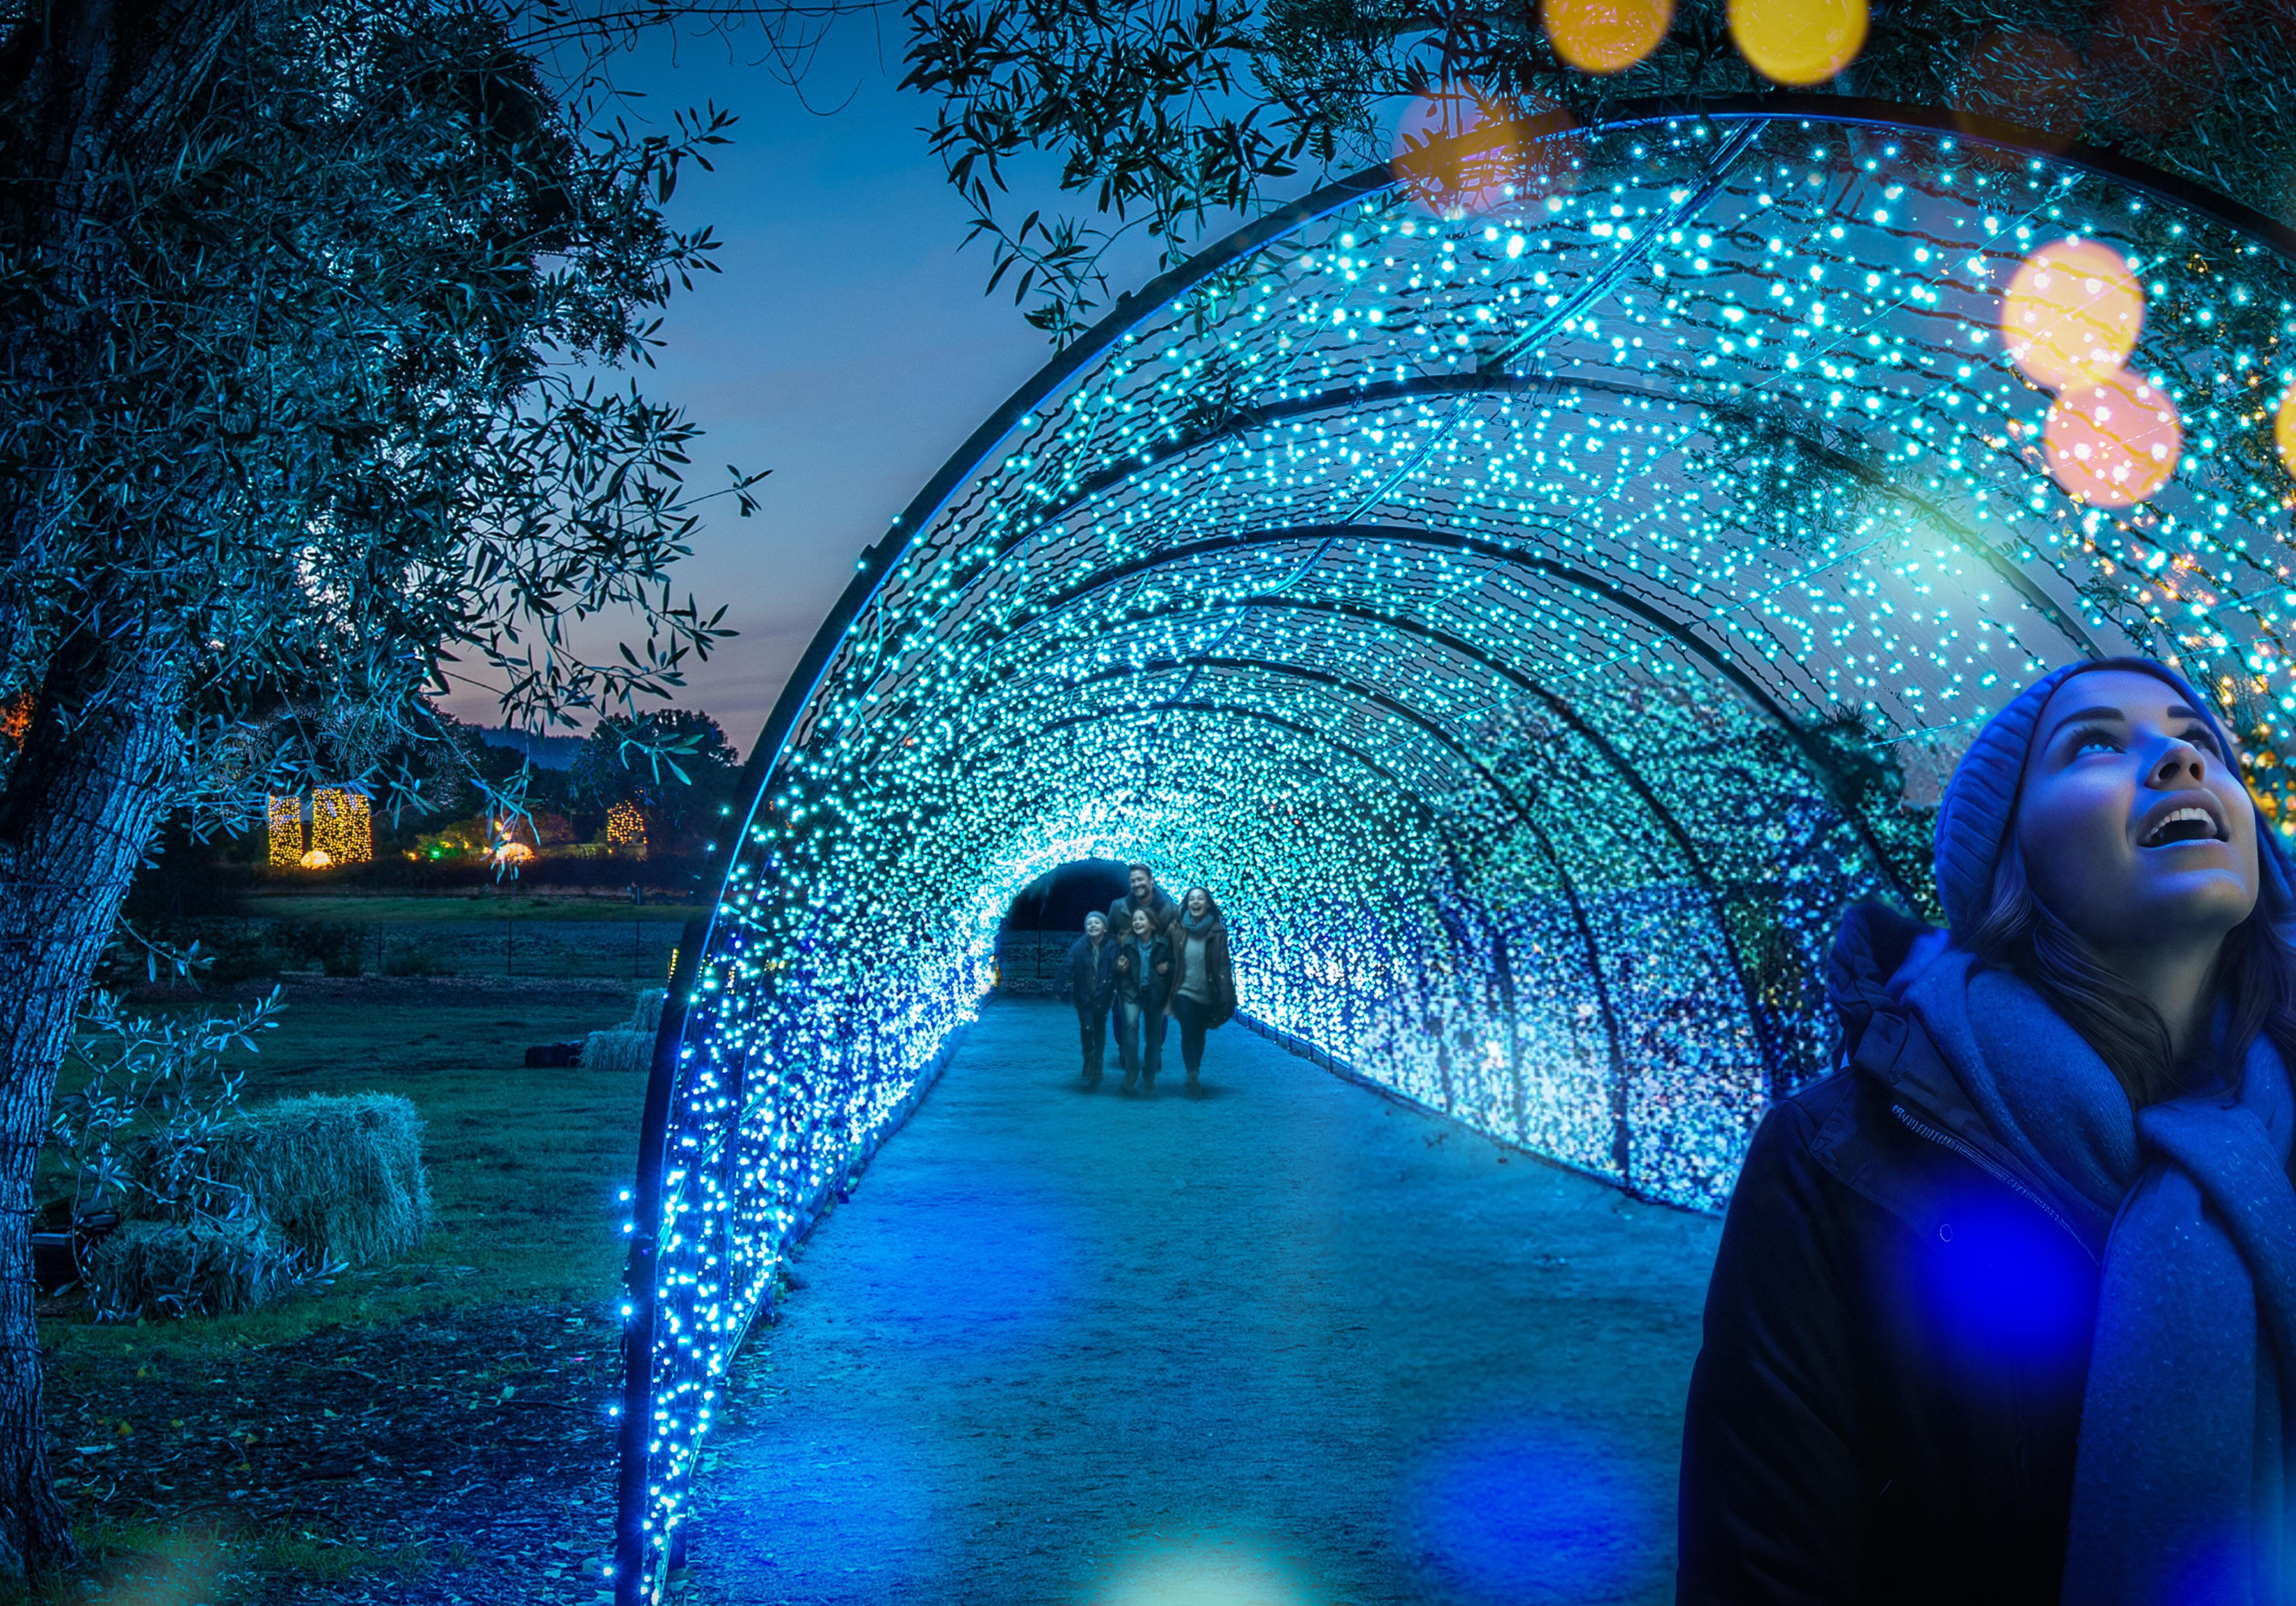 Garden,  Holidays,  Evening,  Garden Lights
Person with long brown hair a purple hat and blue scarf walks through the light tunnel with a family walking behind,